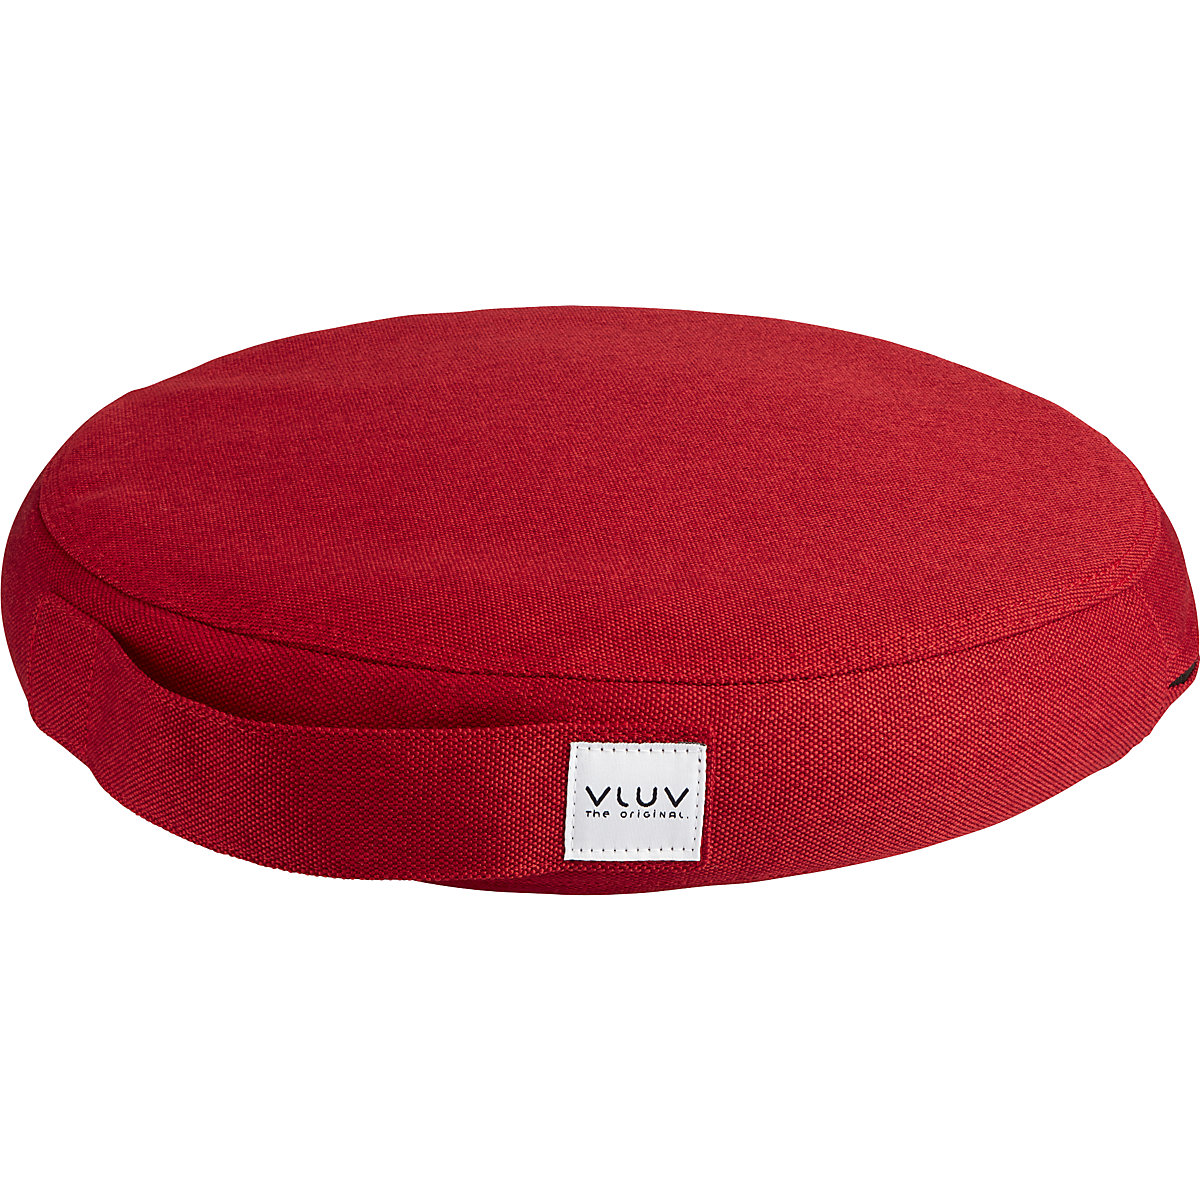 PIL&PED LEIV balance cushion – VLUV, with fabric cover, Ø 360 mm, ruby red